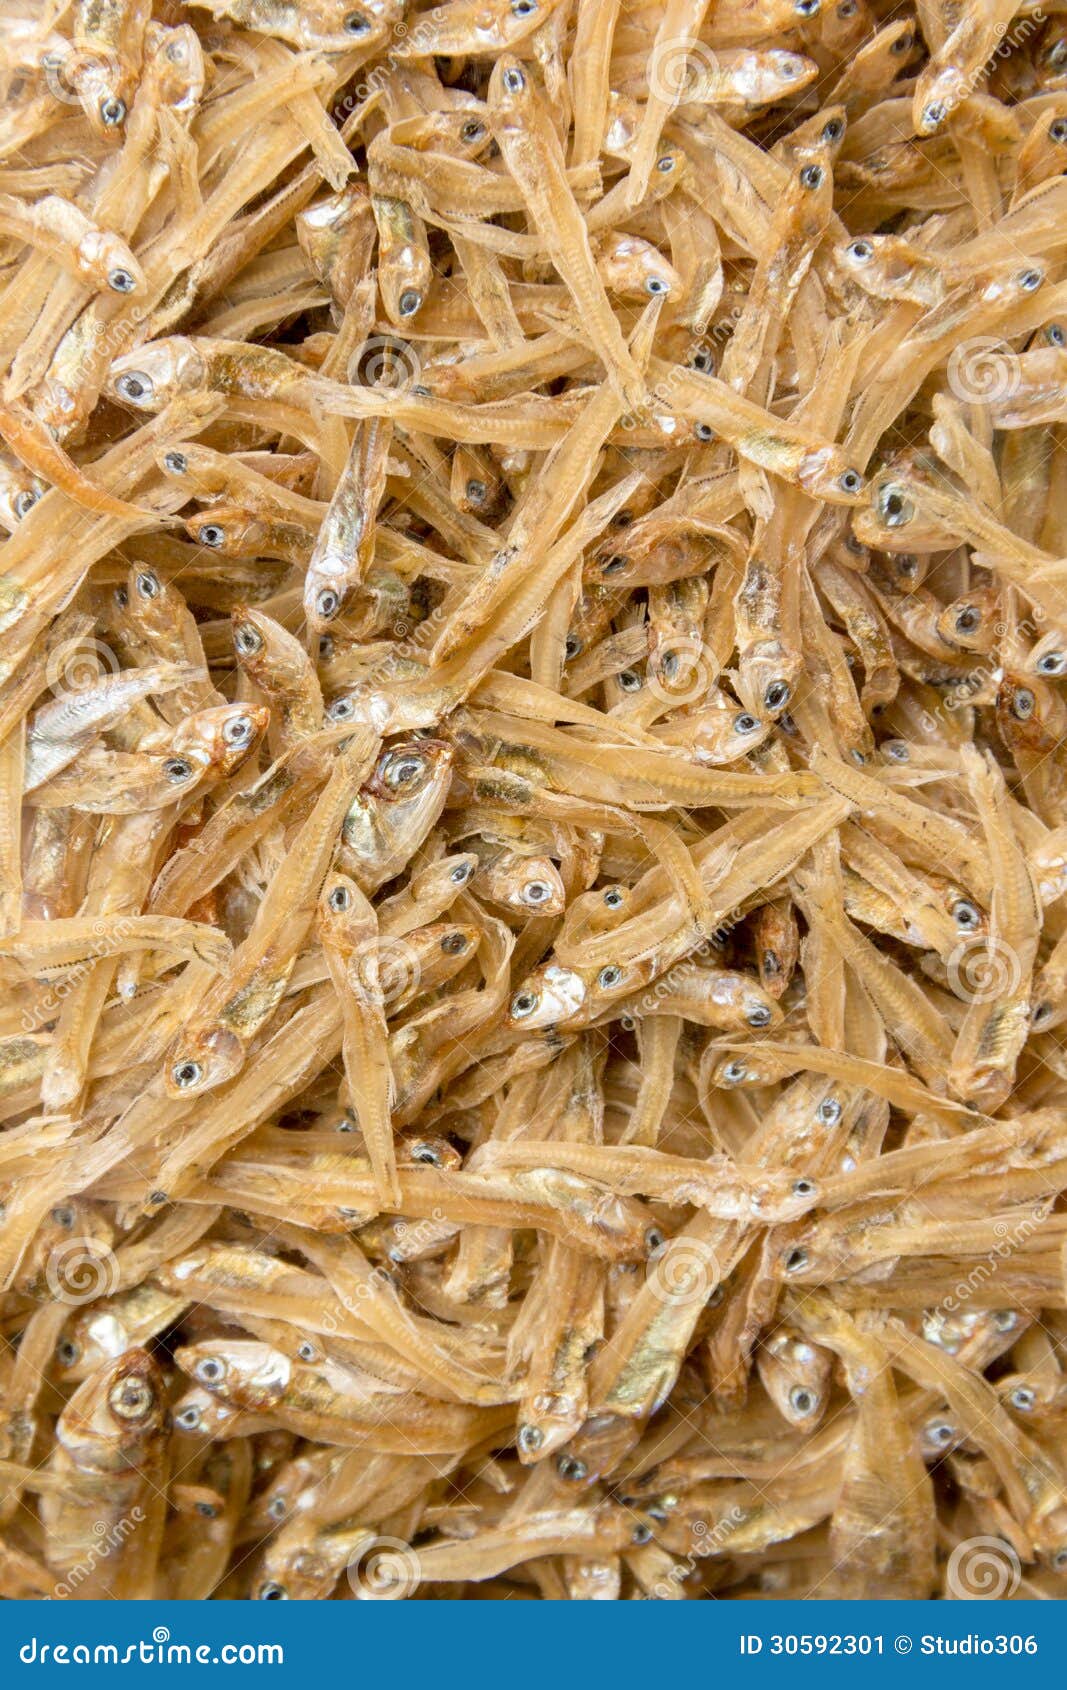 Dried Small Crispy Bake Fish Stock Photo, Picture and Royalty Free Image.  Image 191010341.